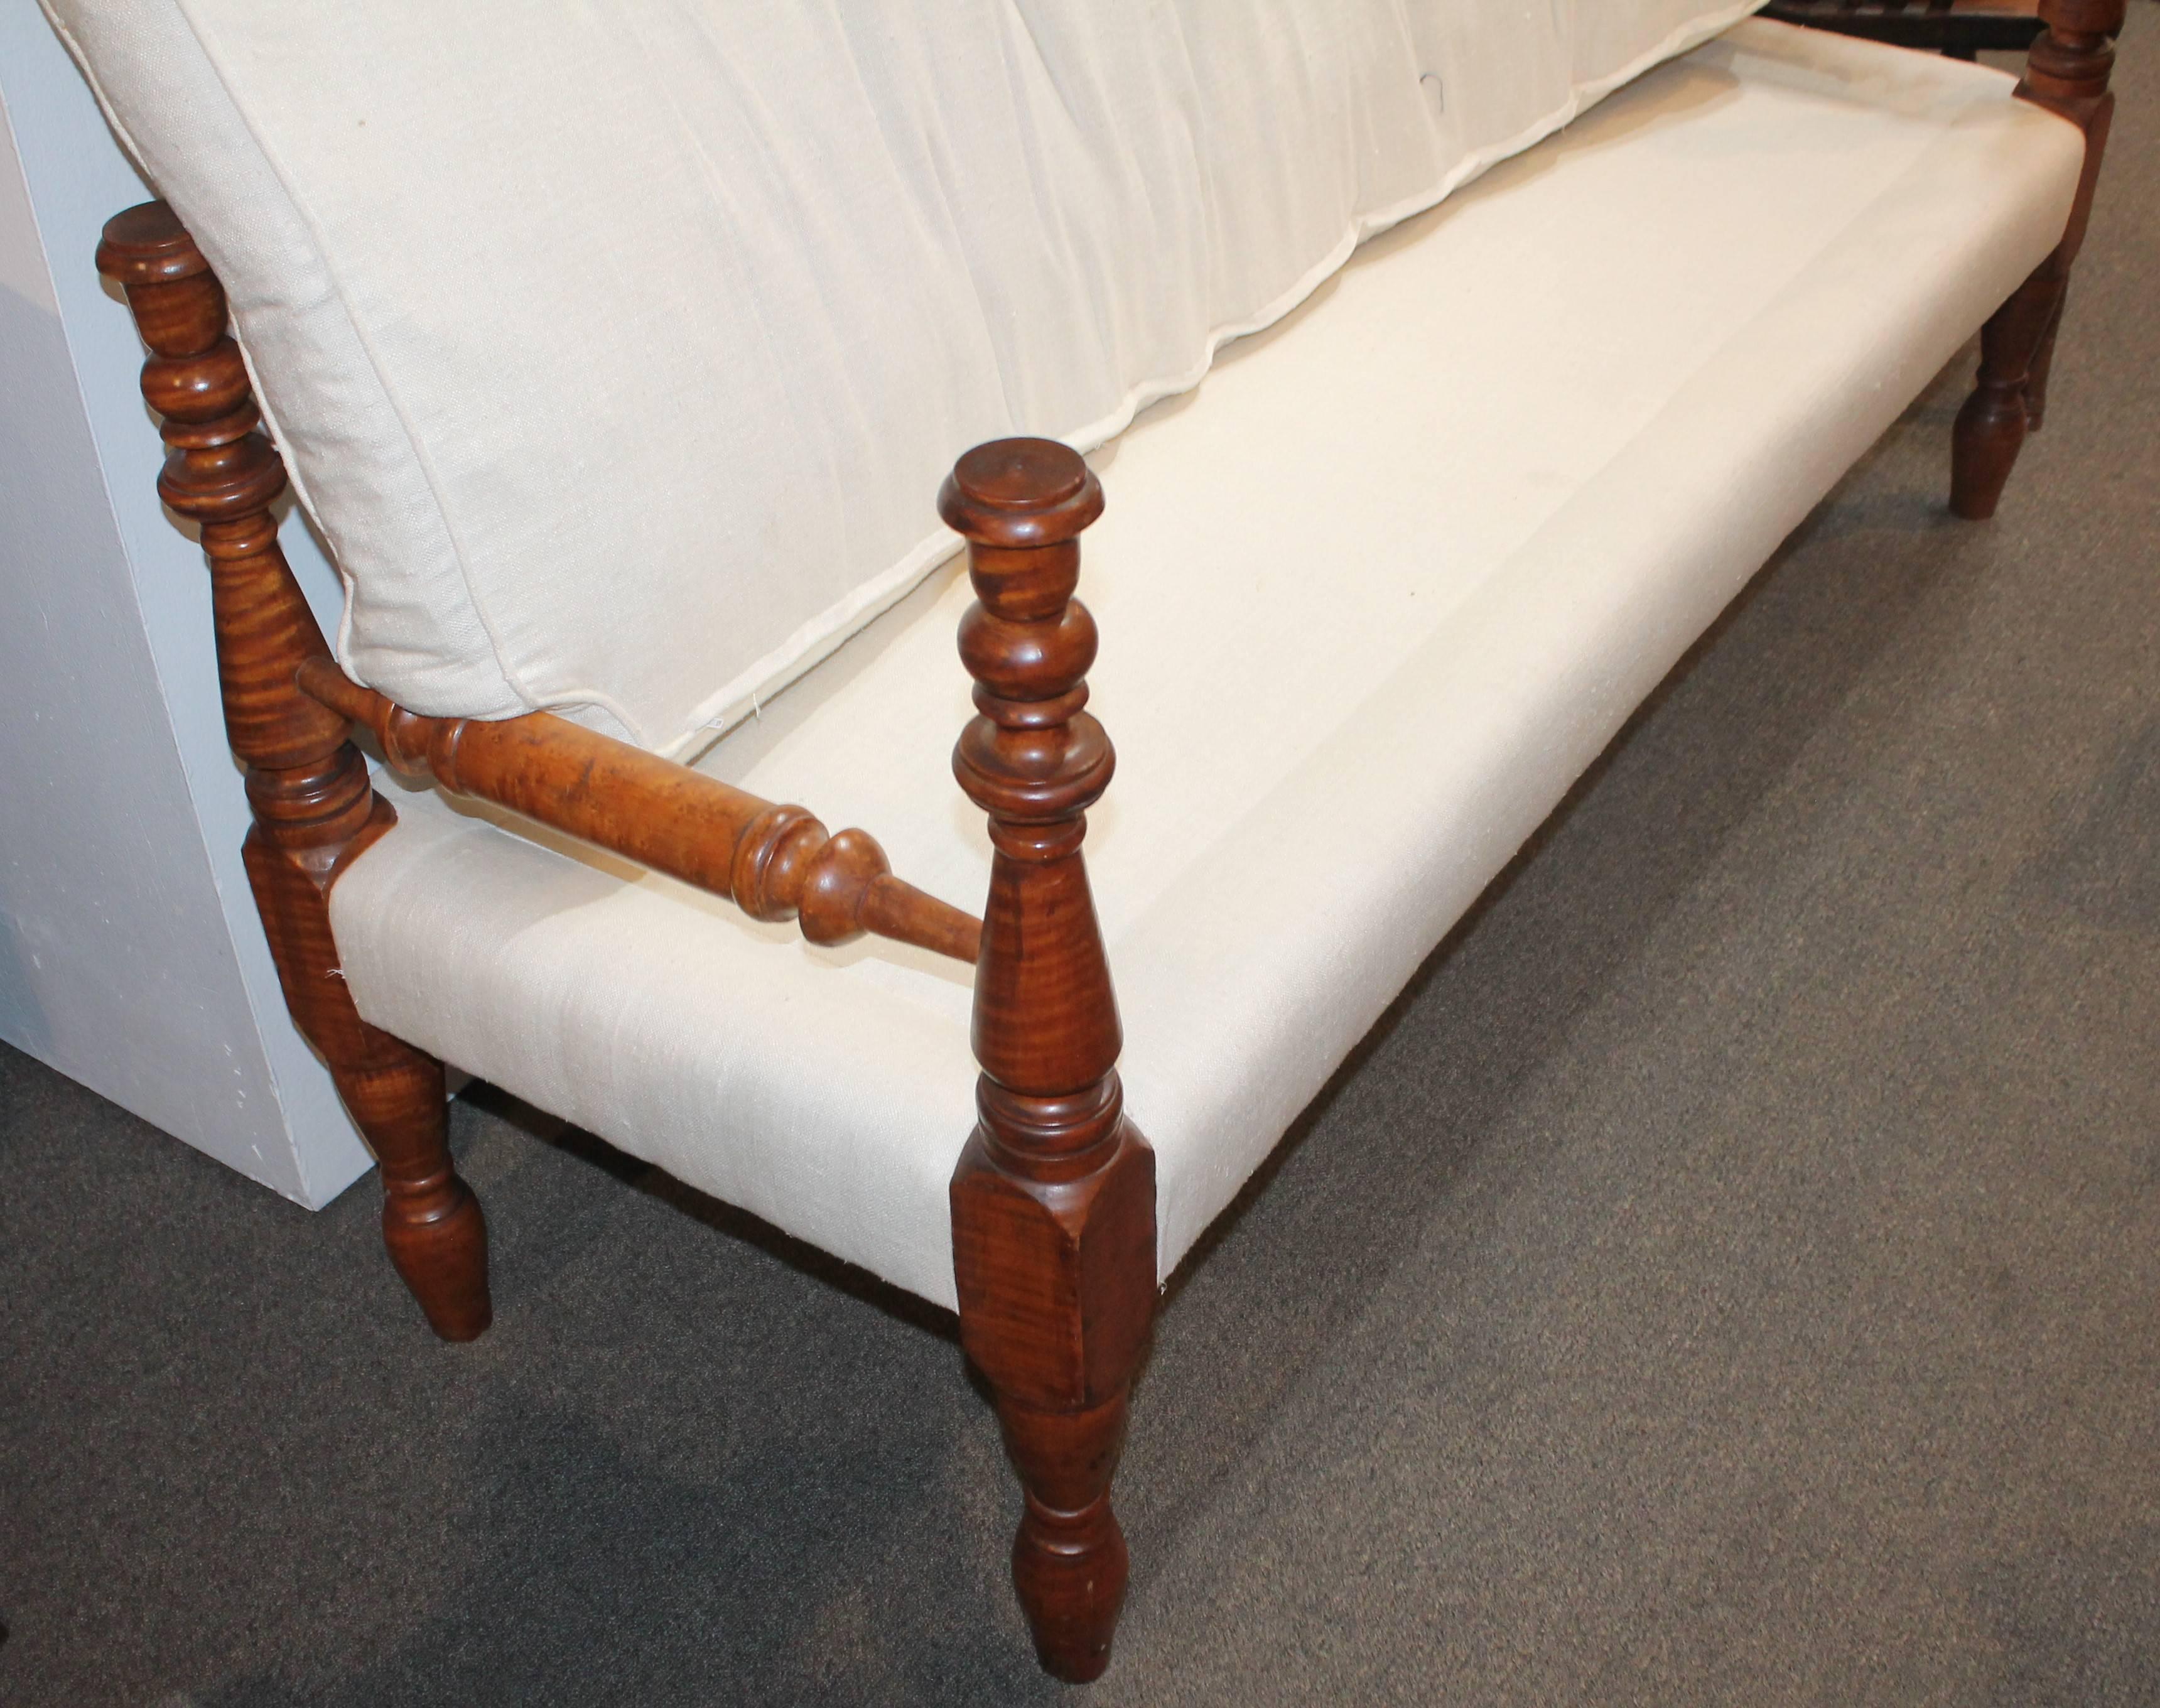 Patinated Early 19th Century Bird's-Eye Maple Daybed or Bench Upholstered in Linen